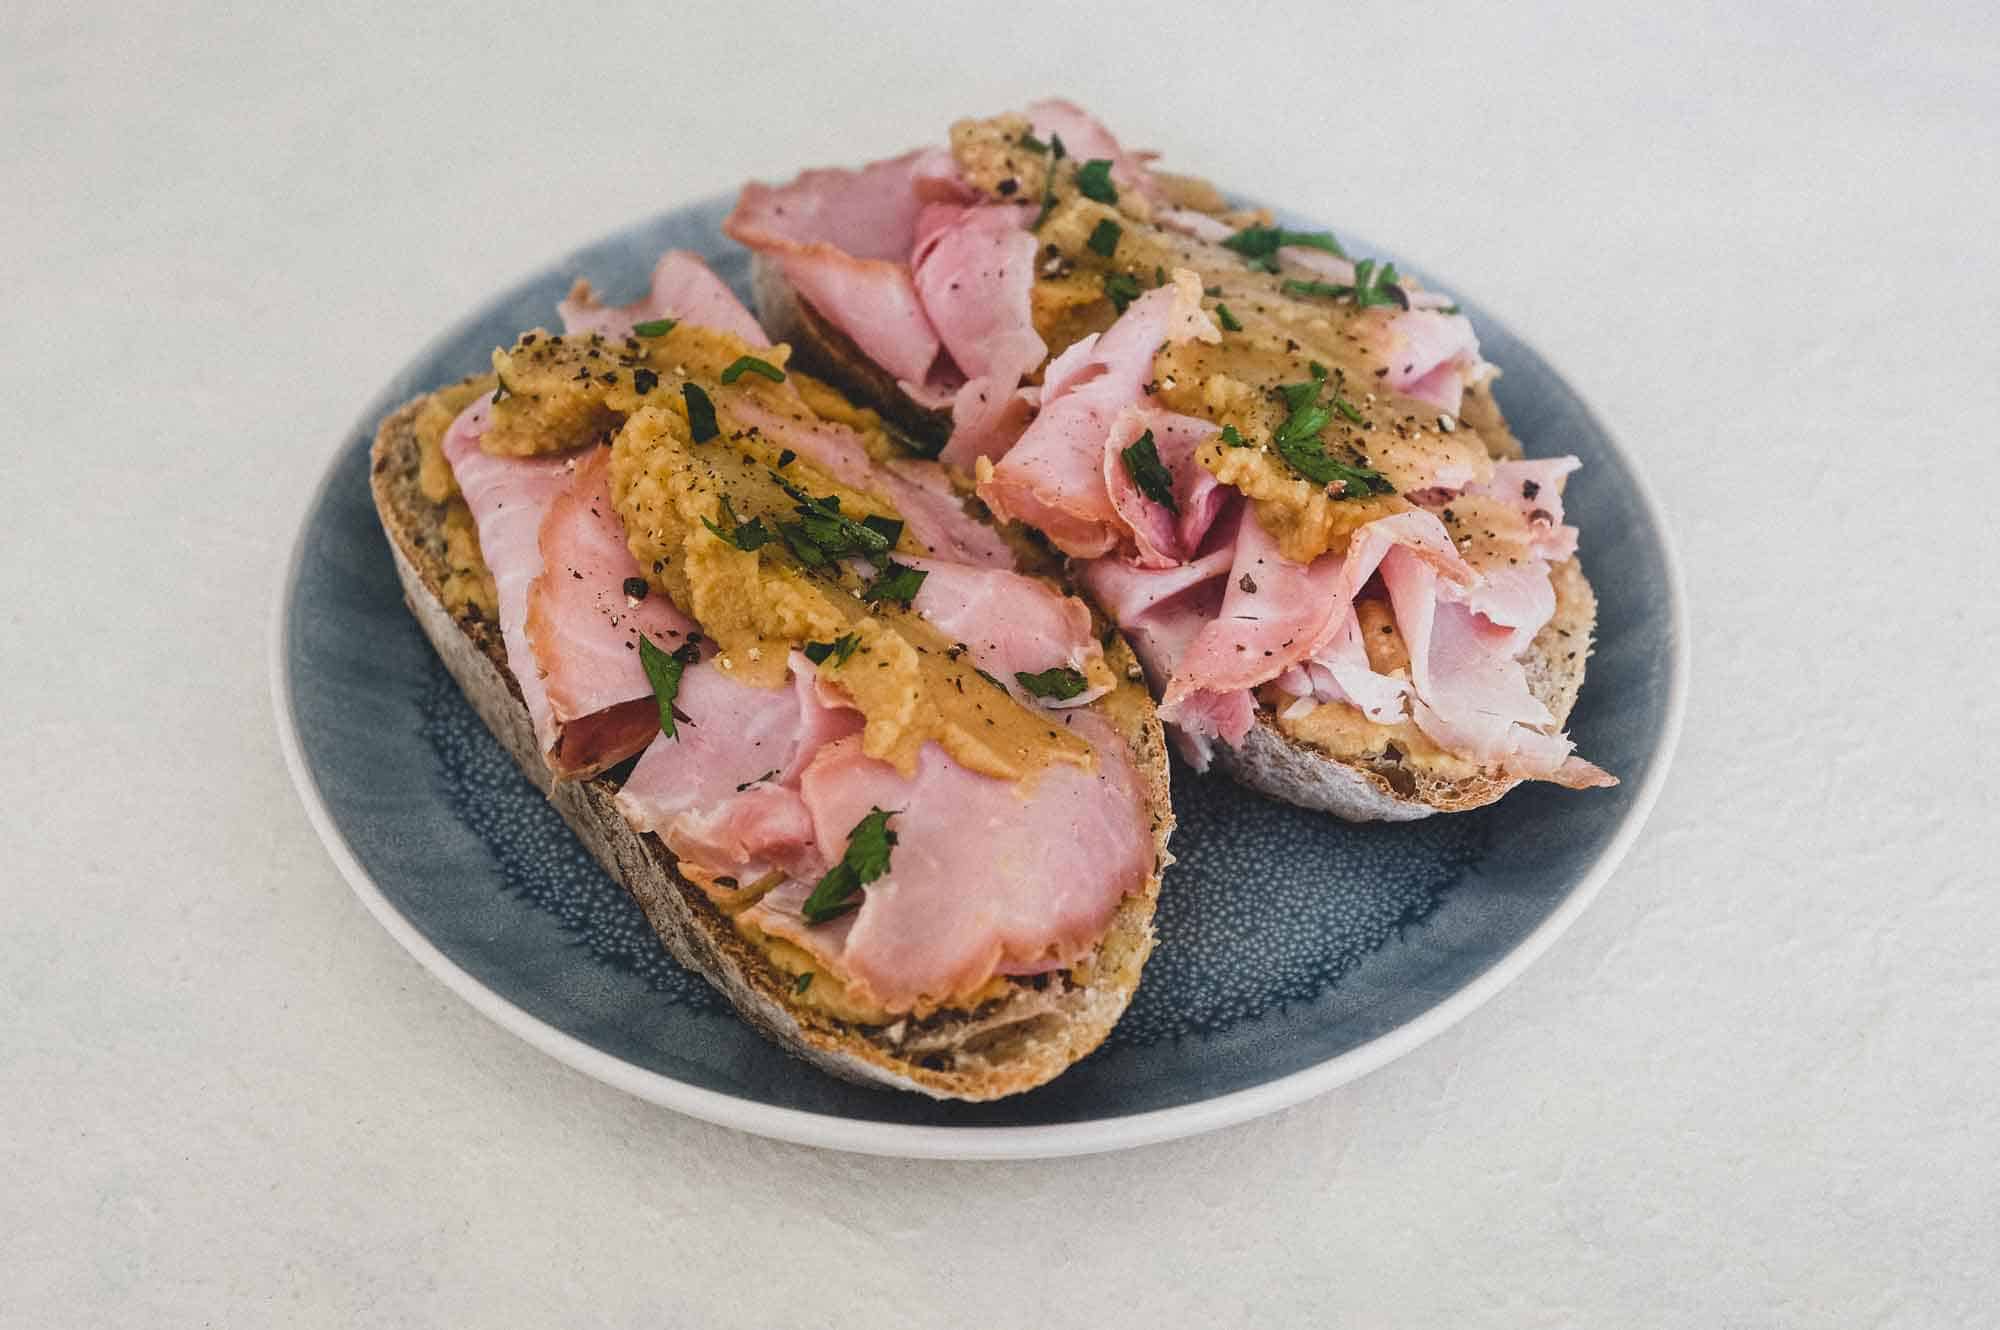 A an open sandwich with ham and pease pudding.